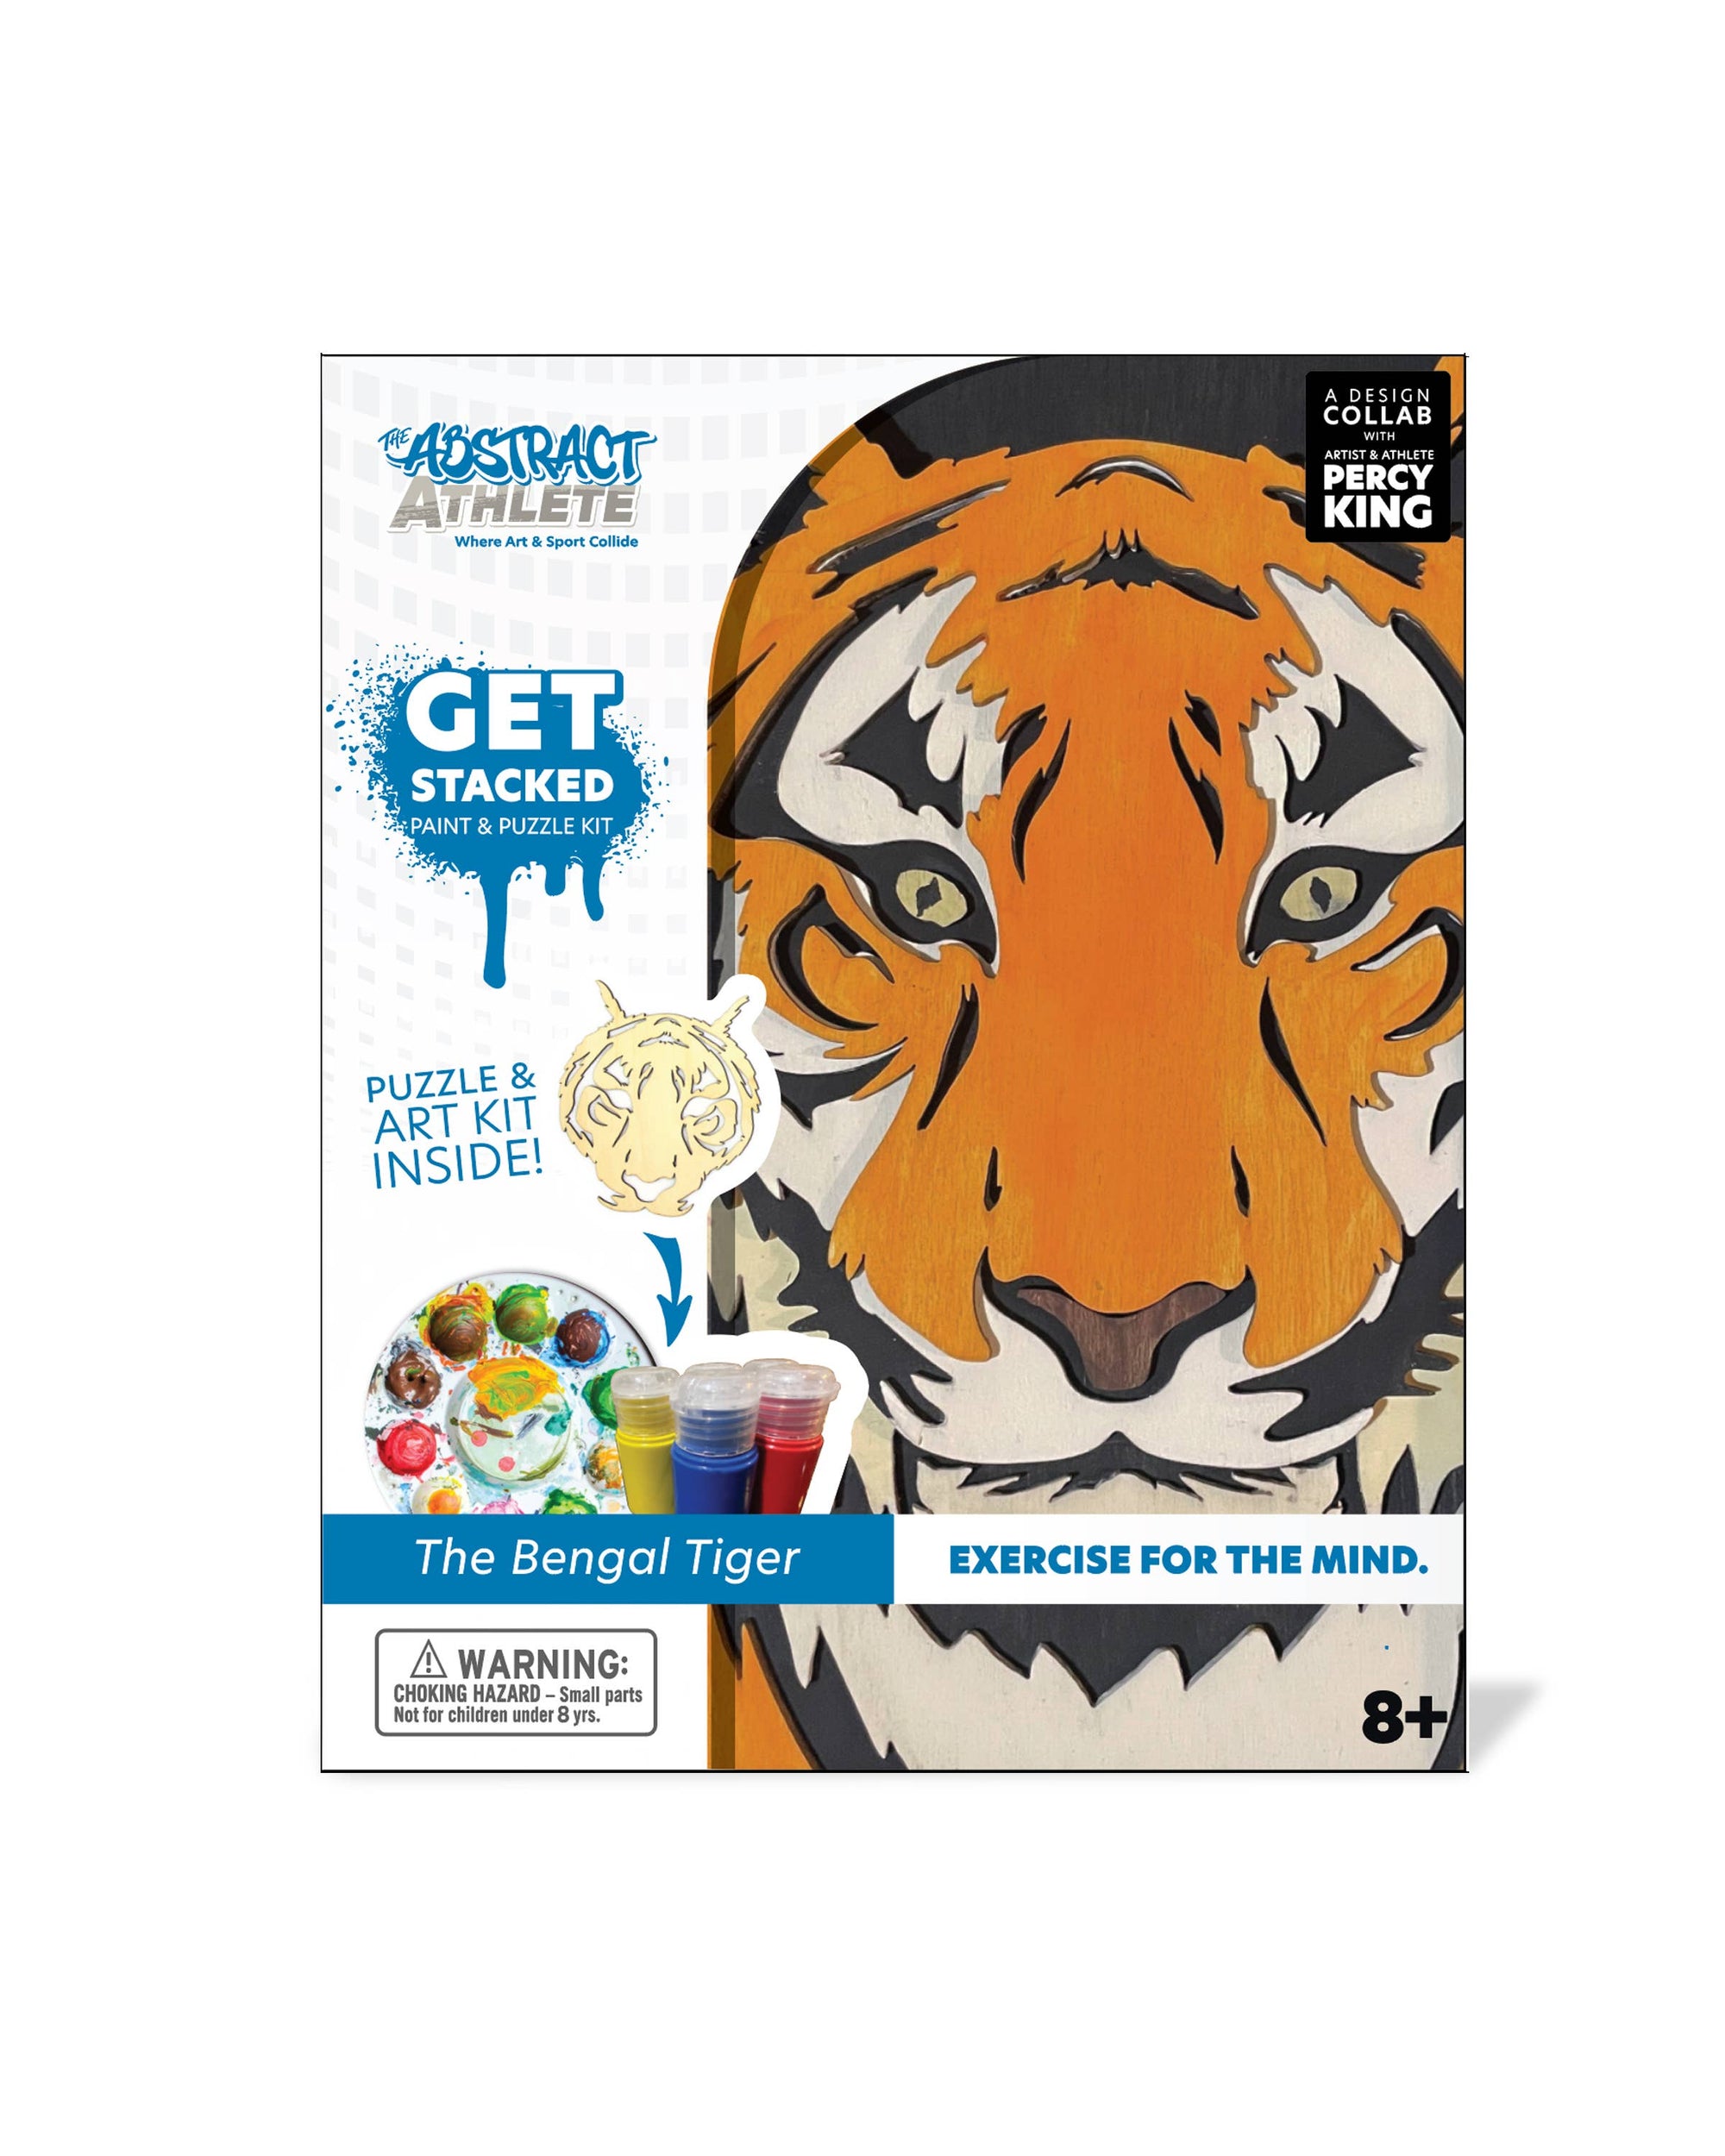 Abstract Athlete Get Stacked Paint & Puzzle Kit - Tiger